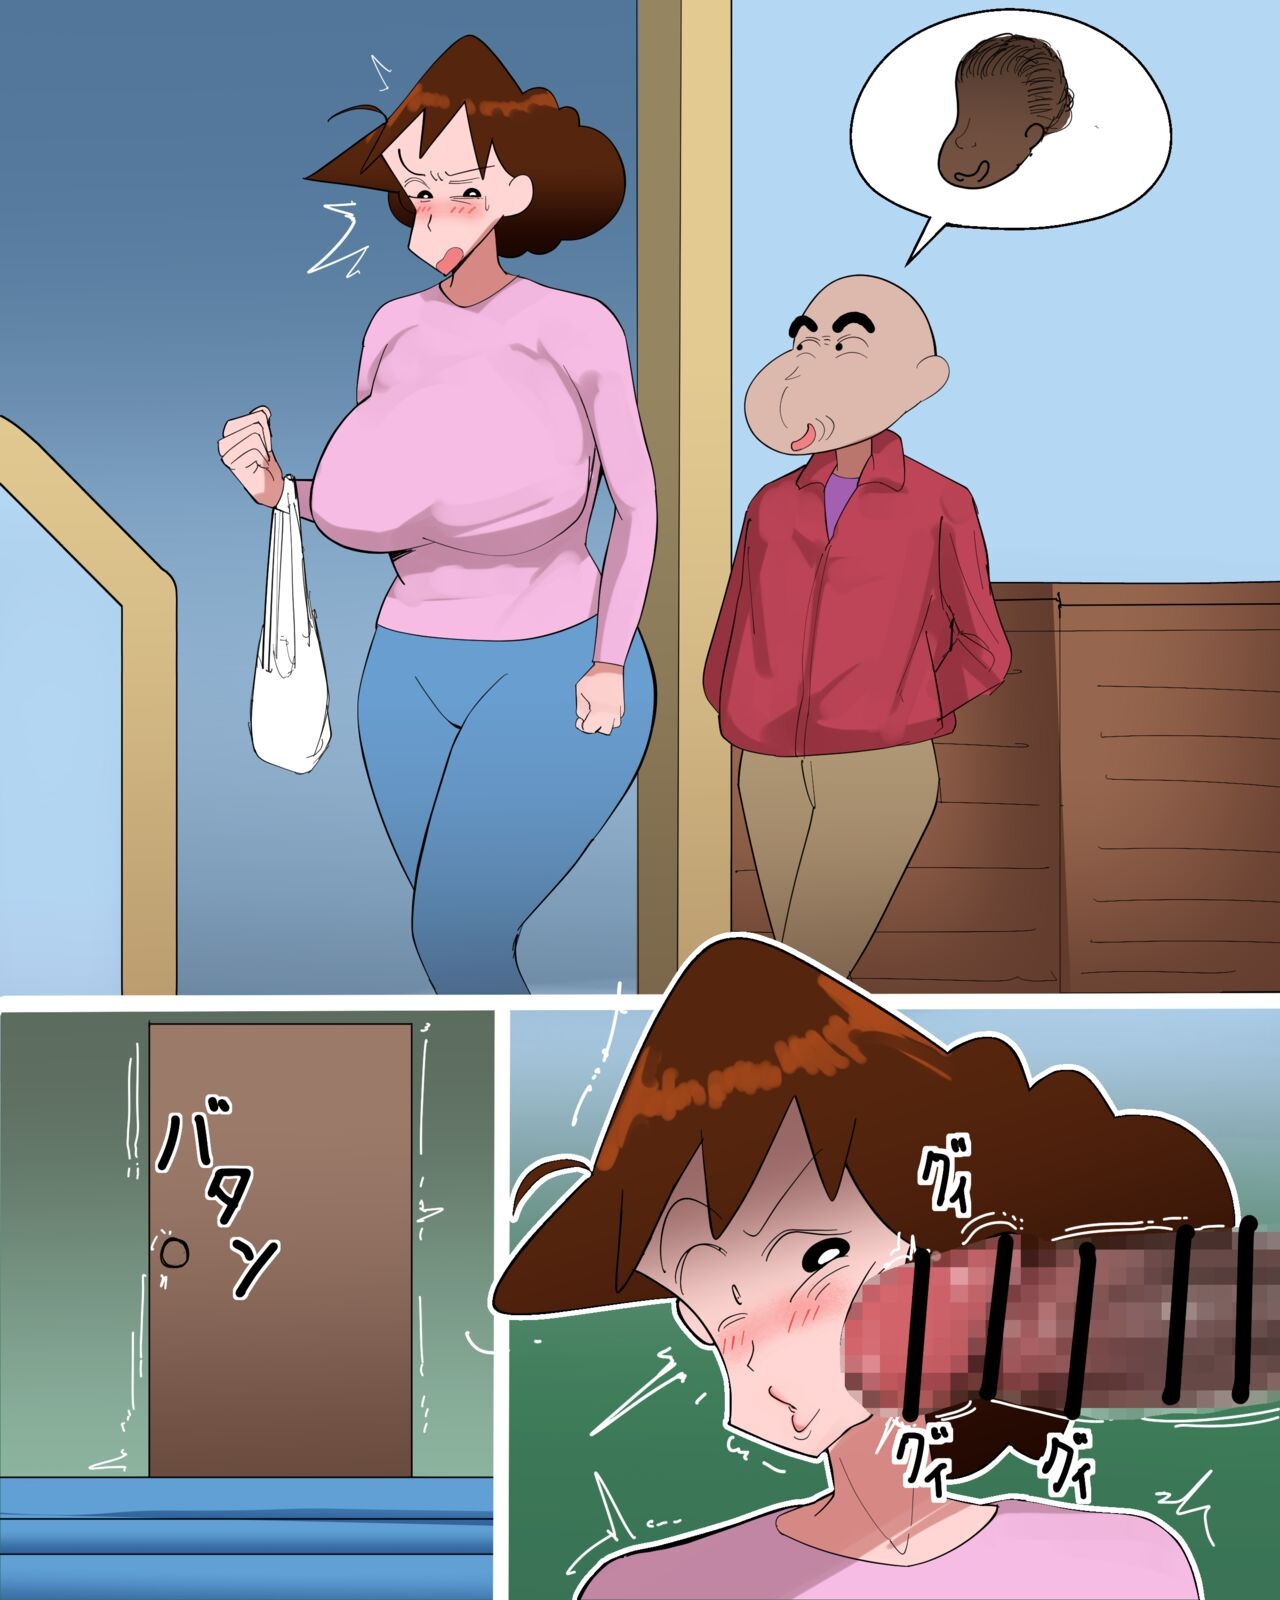 Explore the Underbelly of Shin Chan's World with Our Hentai Collection